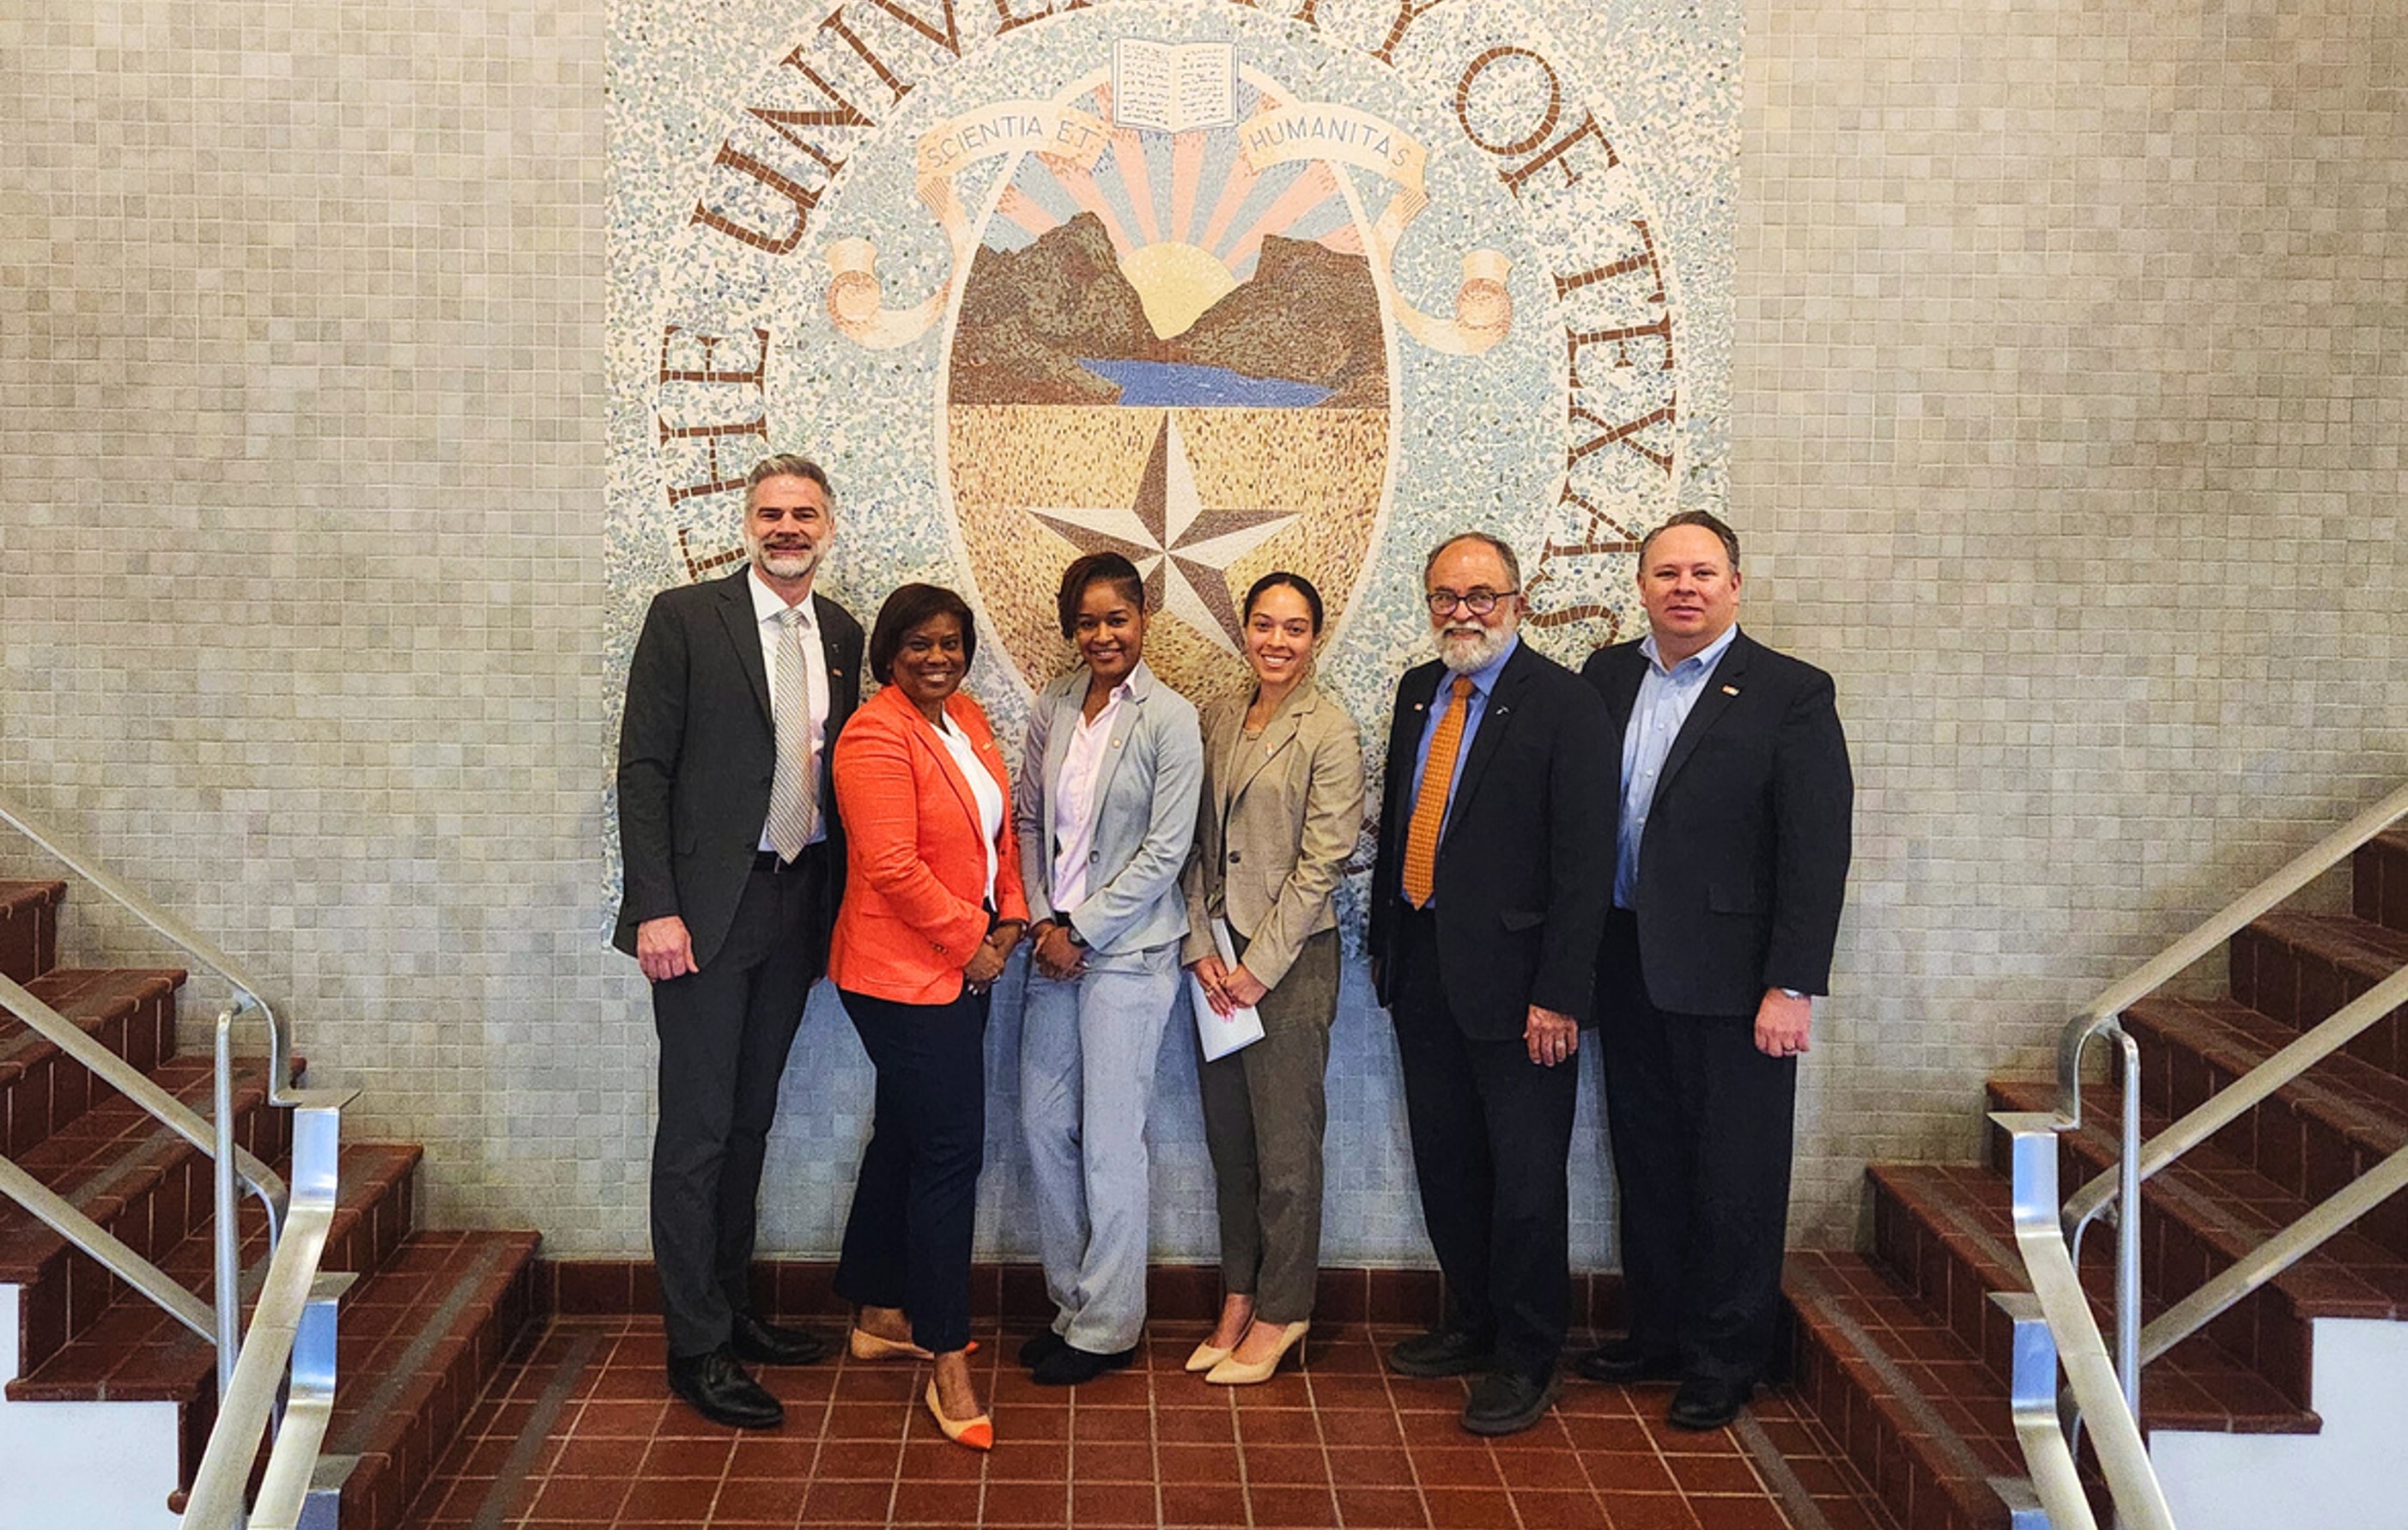 DAS Karent T. Comfort visits University of El Paso to begin talks to establish MSI/MSO National Partnership. Individuals pictured left to right: John Wiebe, Provost and Vice President for Academic Affairs, DAS Karen T. Comfort, Crystal Cherry, Deputy Director, Dallas Ft. Worth Federal Executive Board,	Callia Cox, Public Affairs Specialist , Dr. José O. Rivera, Founding Dean - School of Pharmacy , Louie Rodriguez, J.D., Vice Provost for Professional Development, Engagement, and Strategic Initiatives